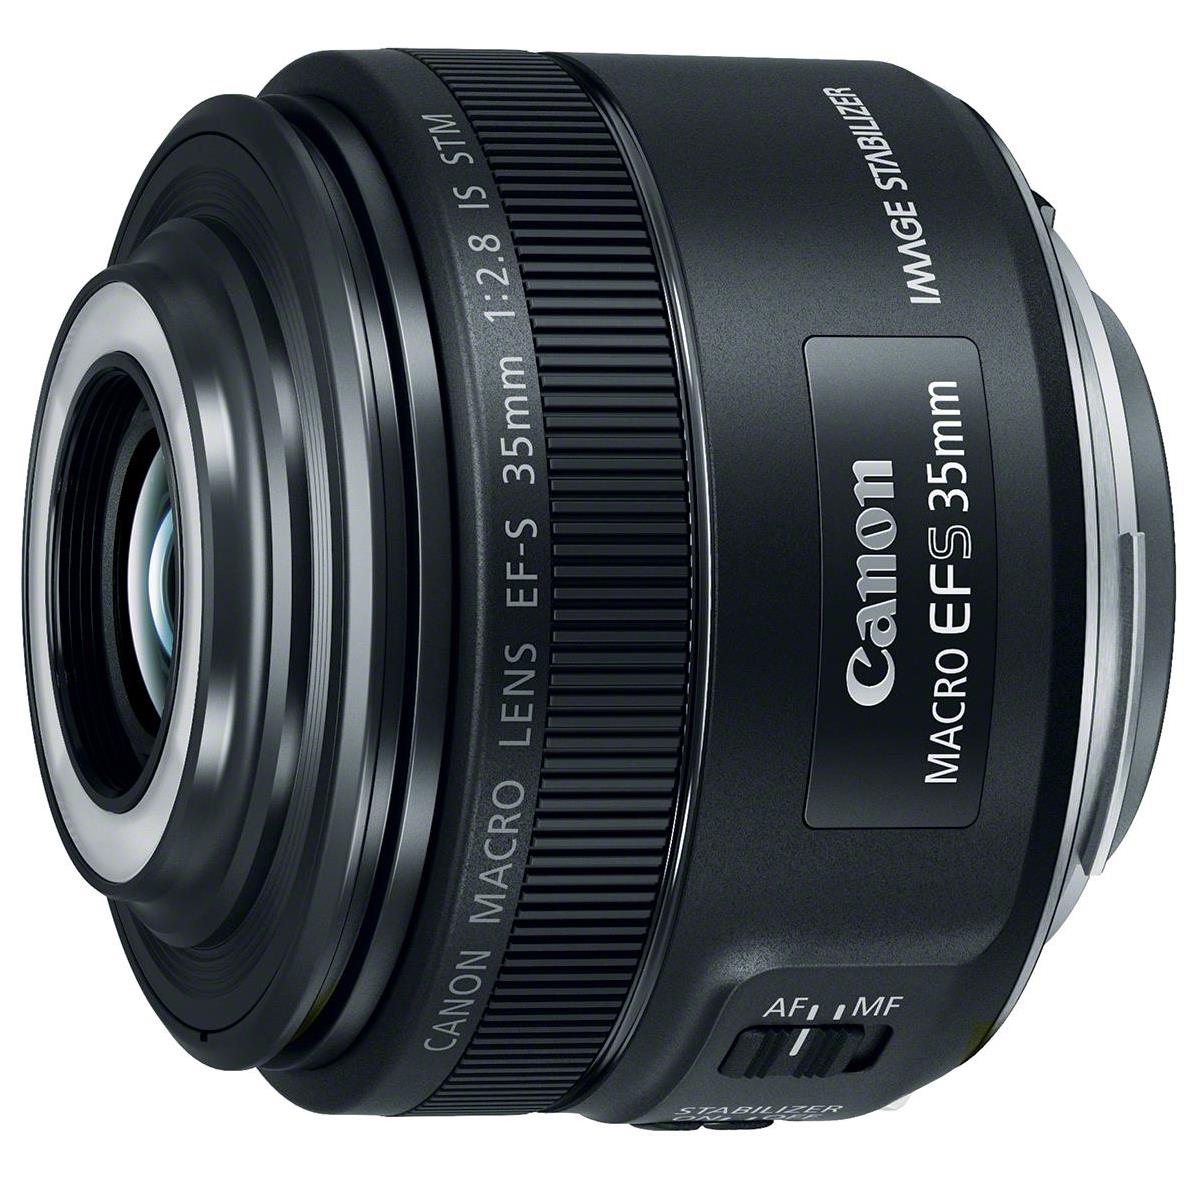 New Canon Rebates! Save up to $300 on select Canon Lenses